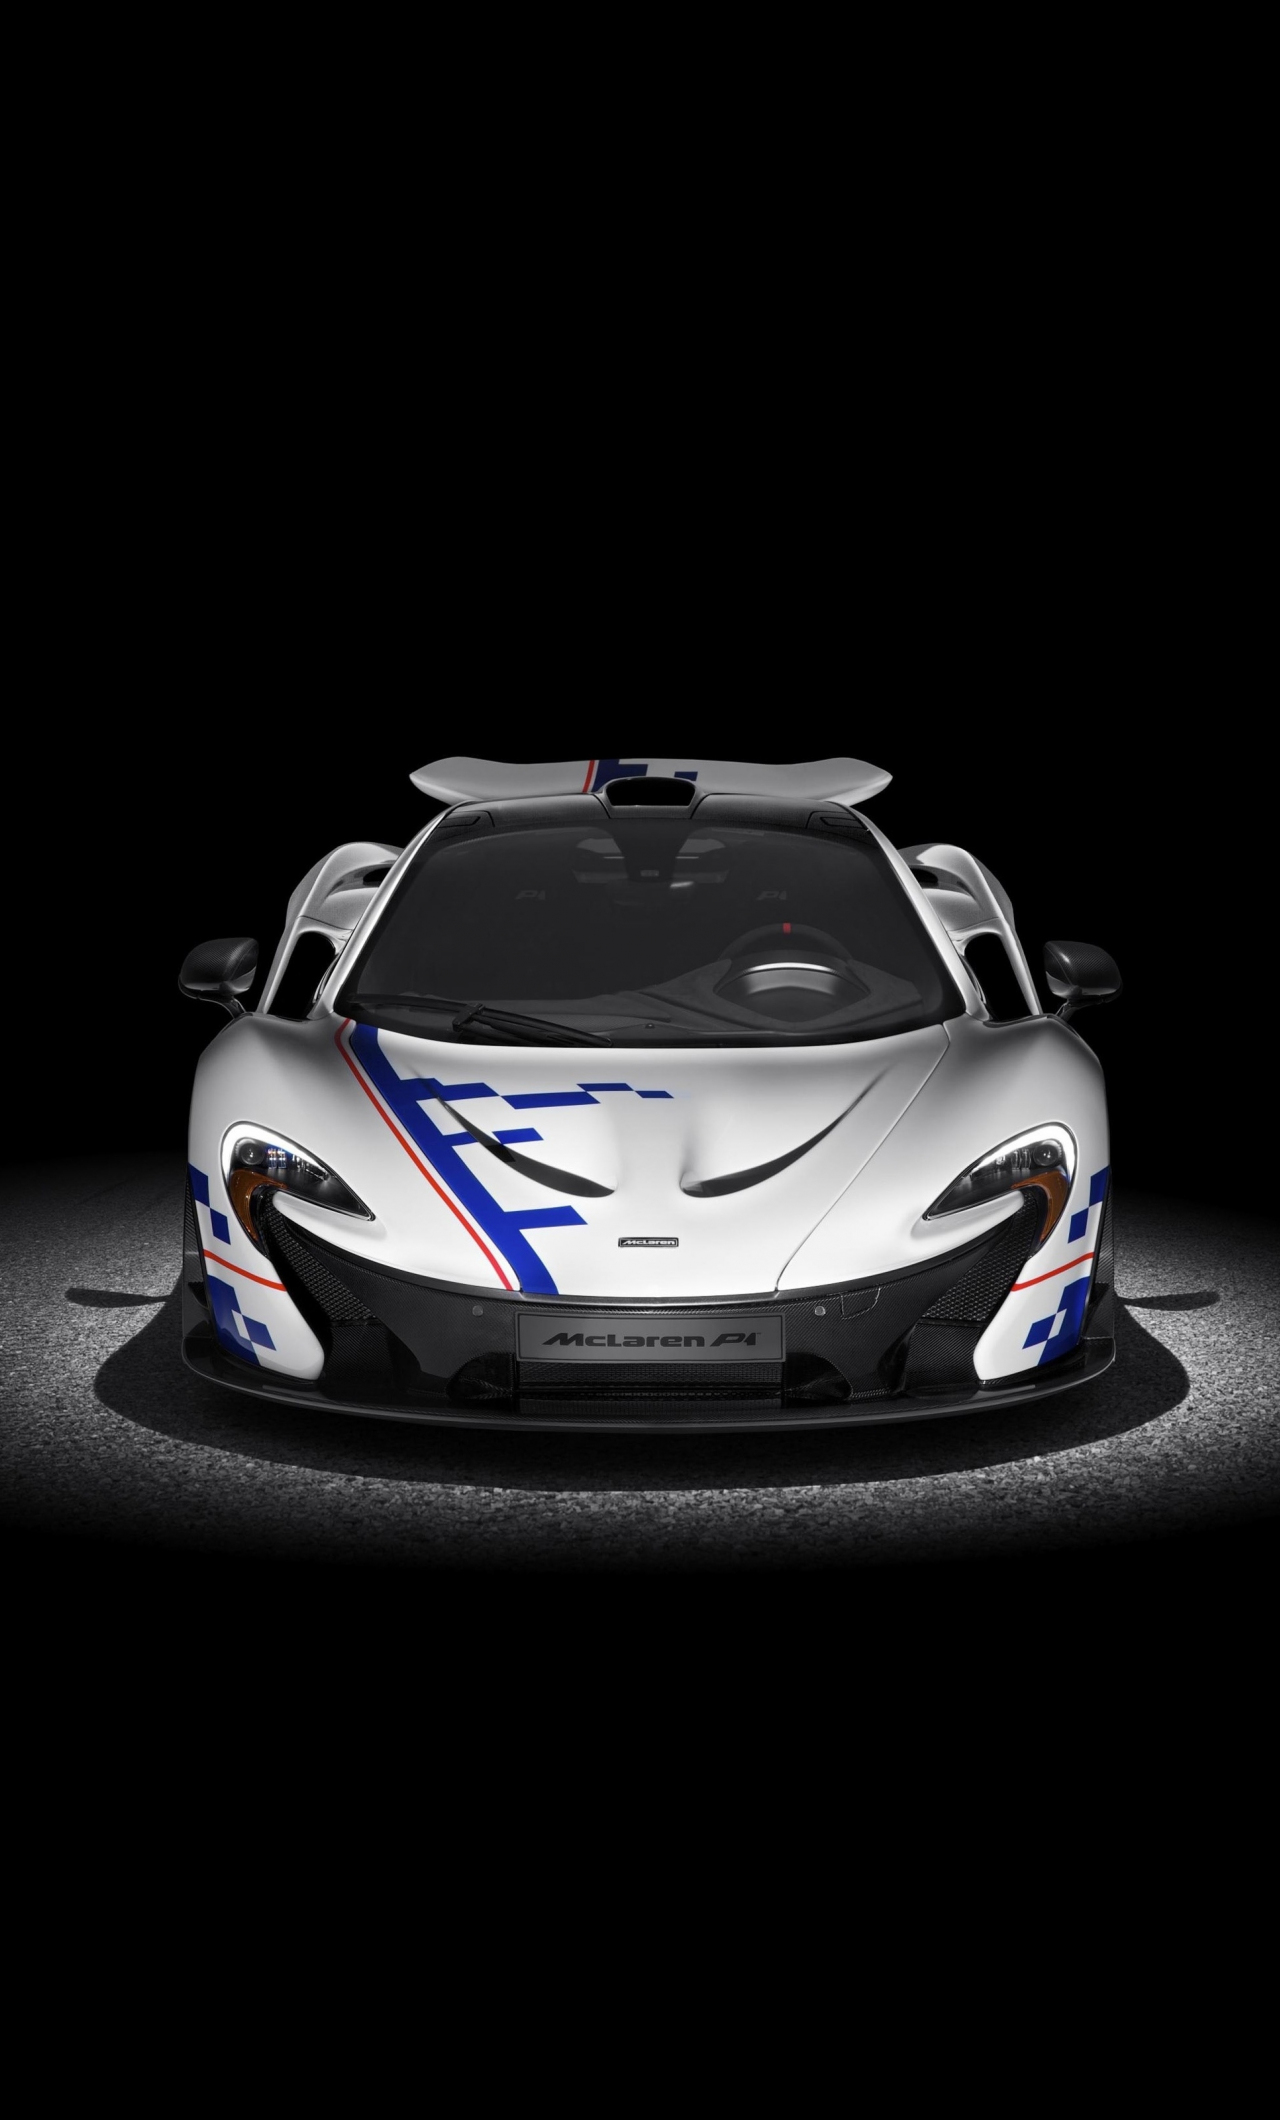 20 Hyundai Mclaren minimalist wallpaper white there are many  from 2014-2021 